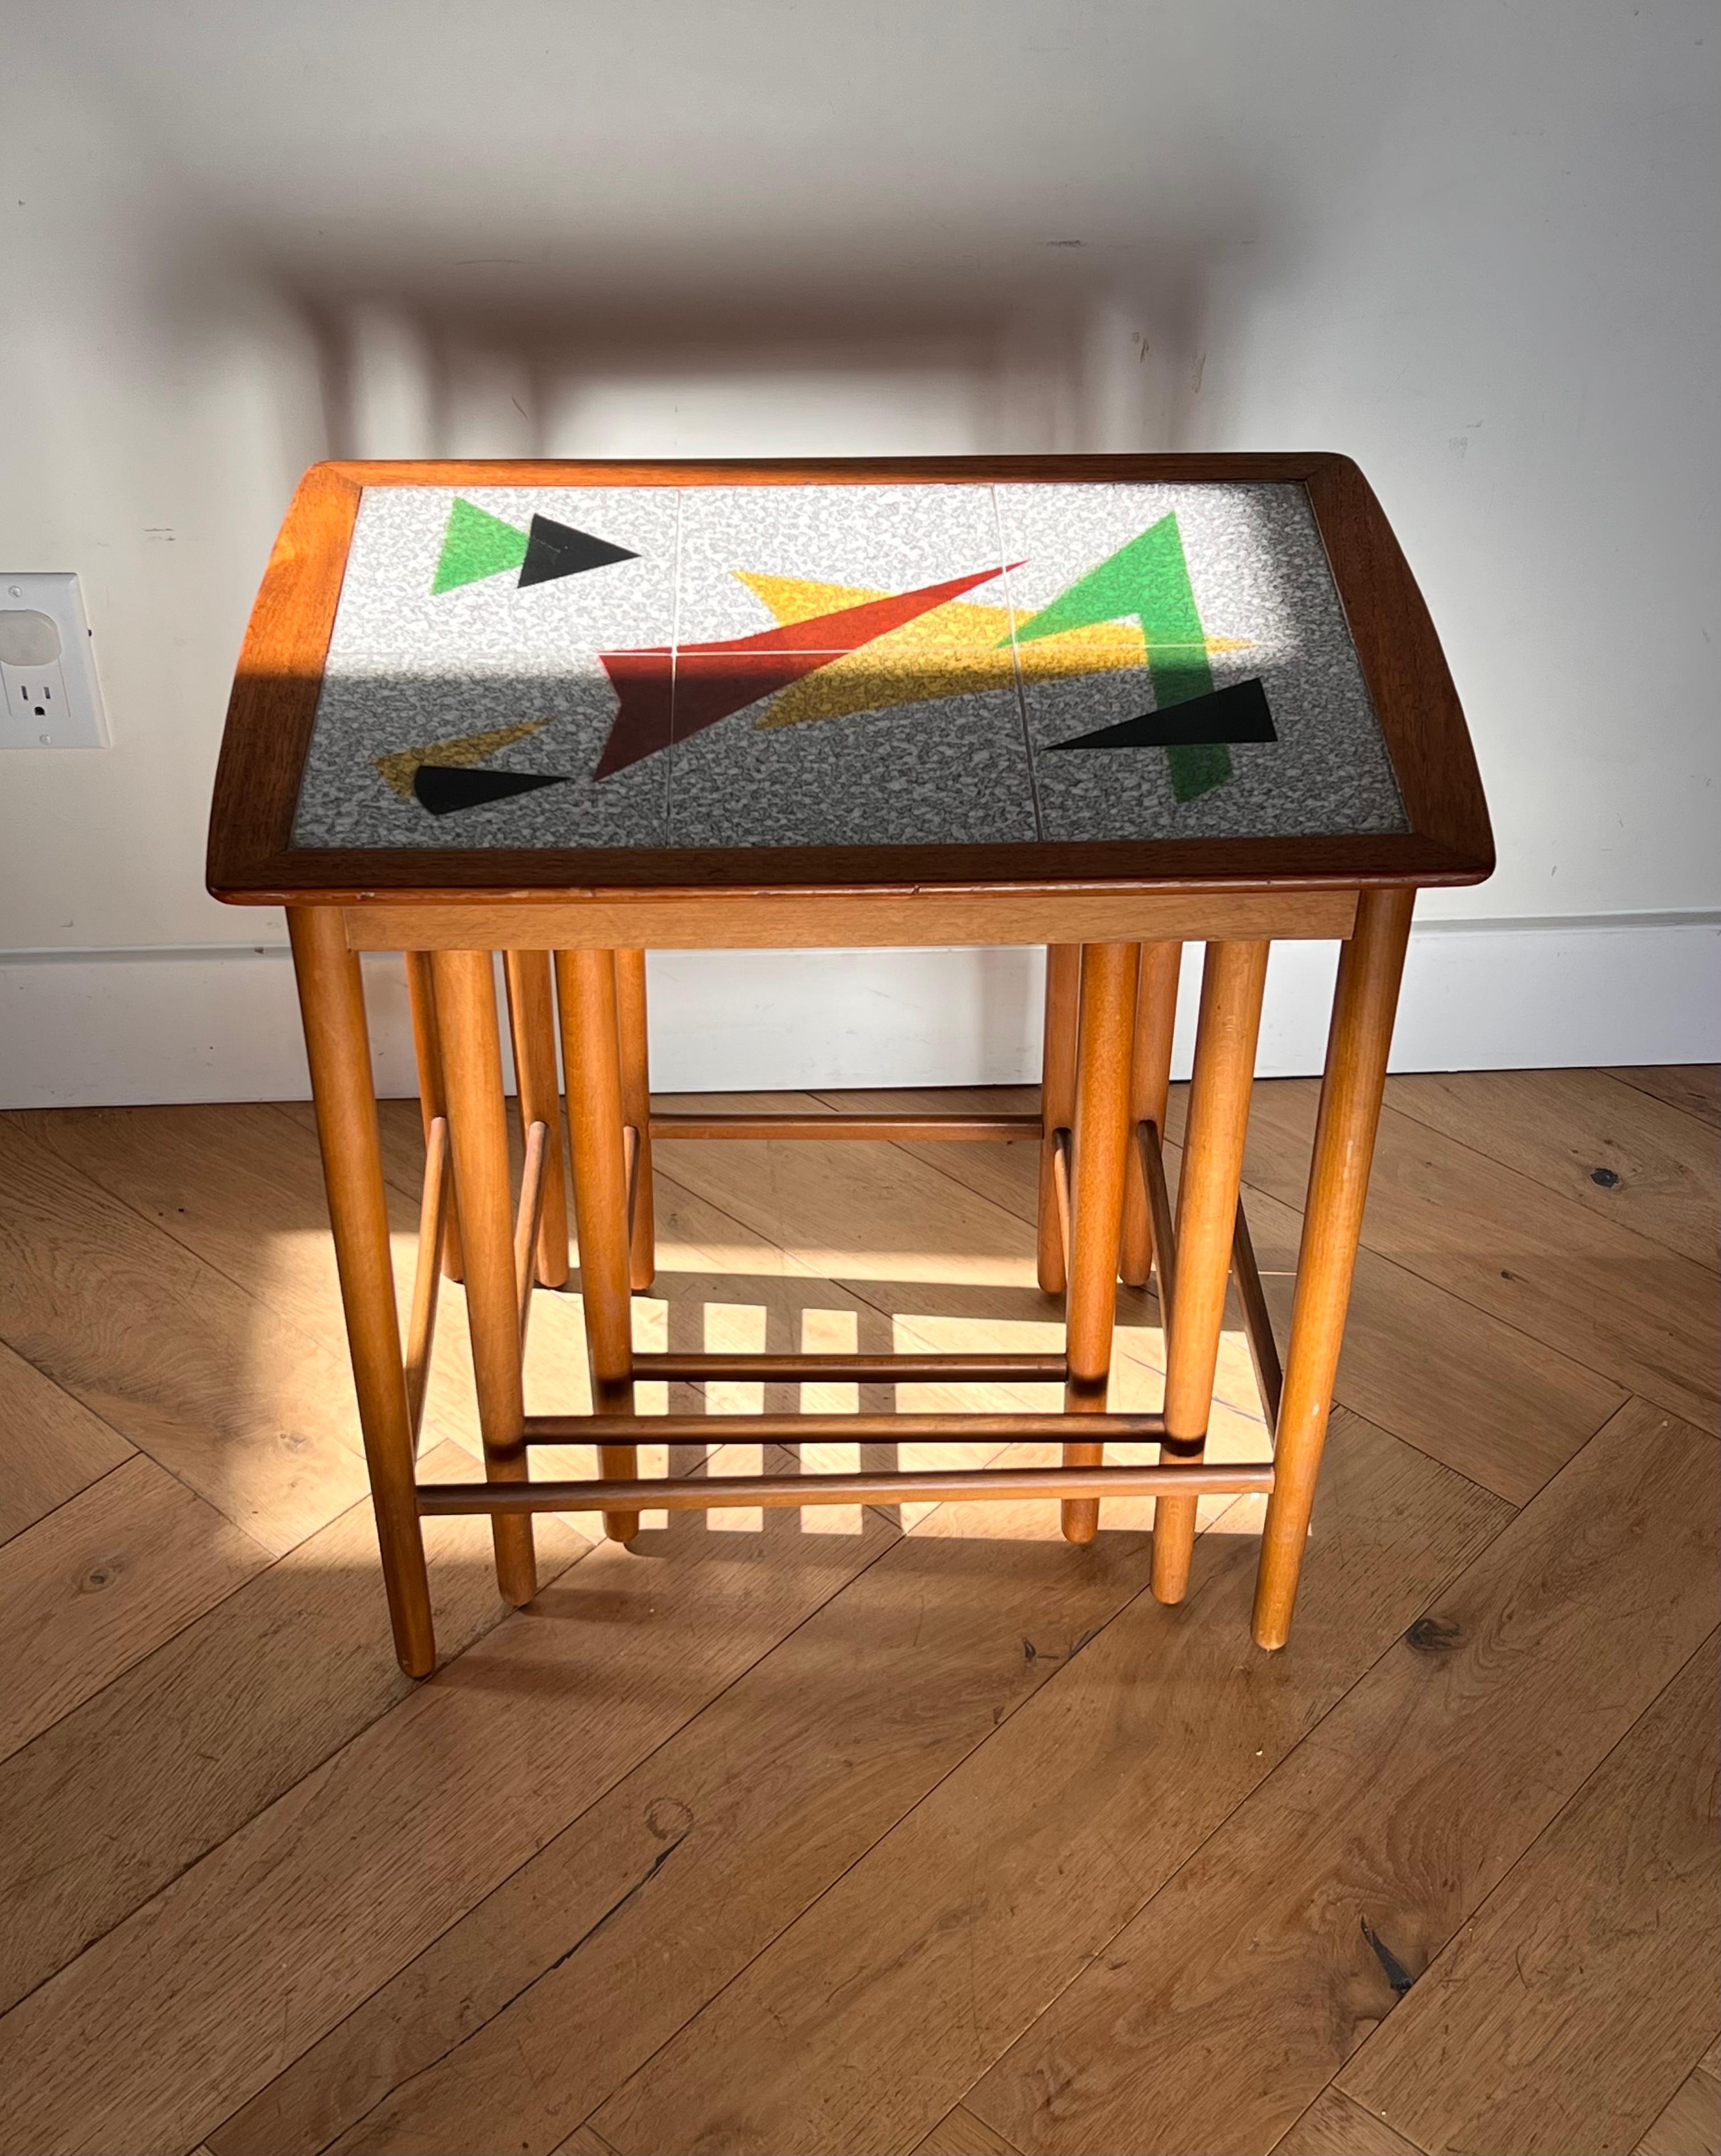 A set of three Mid century modern Danish nesting tables with ceramic tile-inlay, circa early 1960s. The richness of the teak wood contrasts beautifully with the modernist ceramic tiles which boast hues of oxblood, jet, marigold, grass green, and